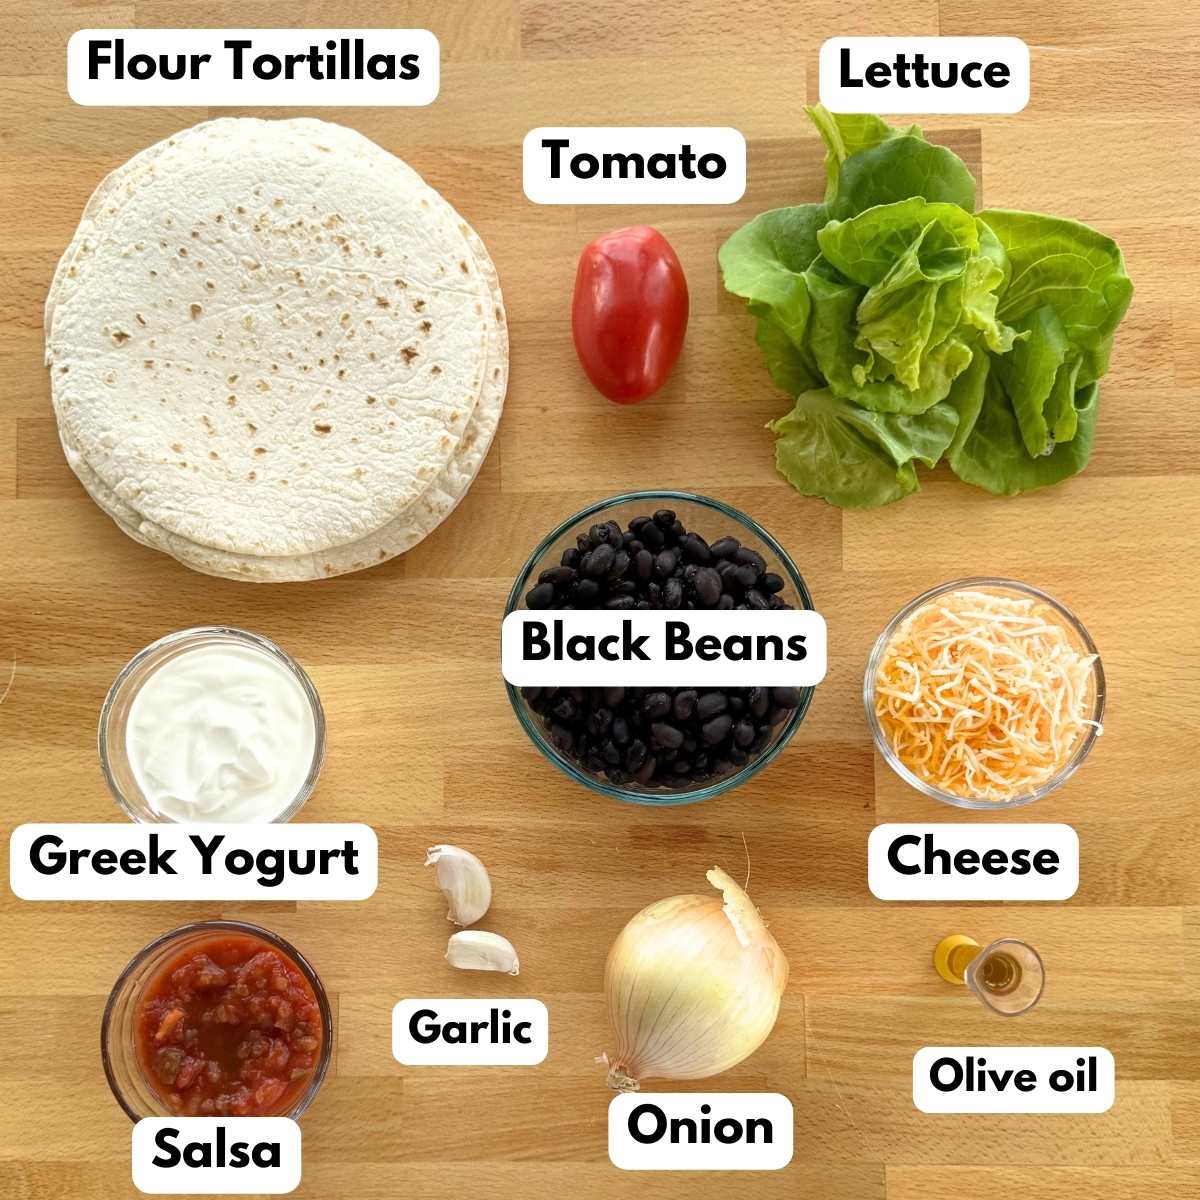 Ingredients to make recipe: stack of flour tortillas, bowl of black beans, bowls of Greek yogurt, salsa, and cheese, onion, two garlic cloves, lettuce leaves, Roma tomato, onion, and measuring container with olive oil.